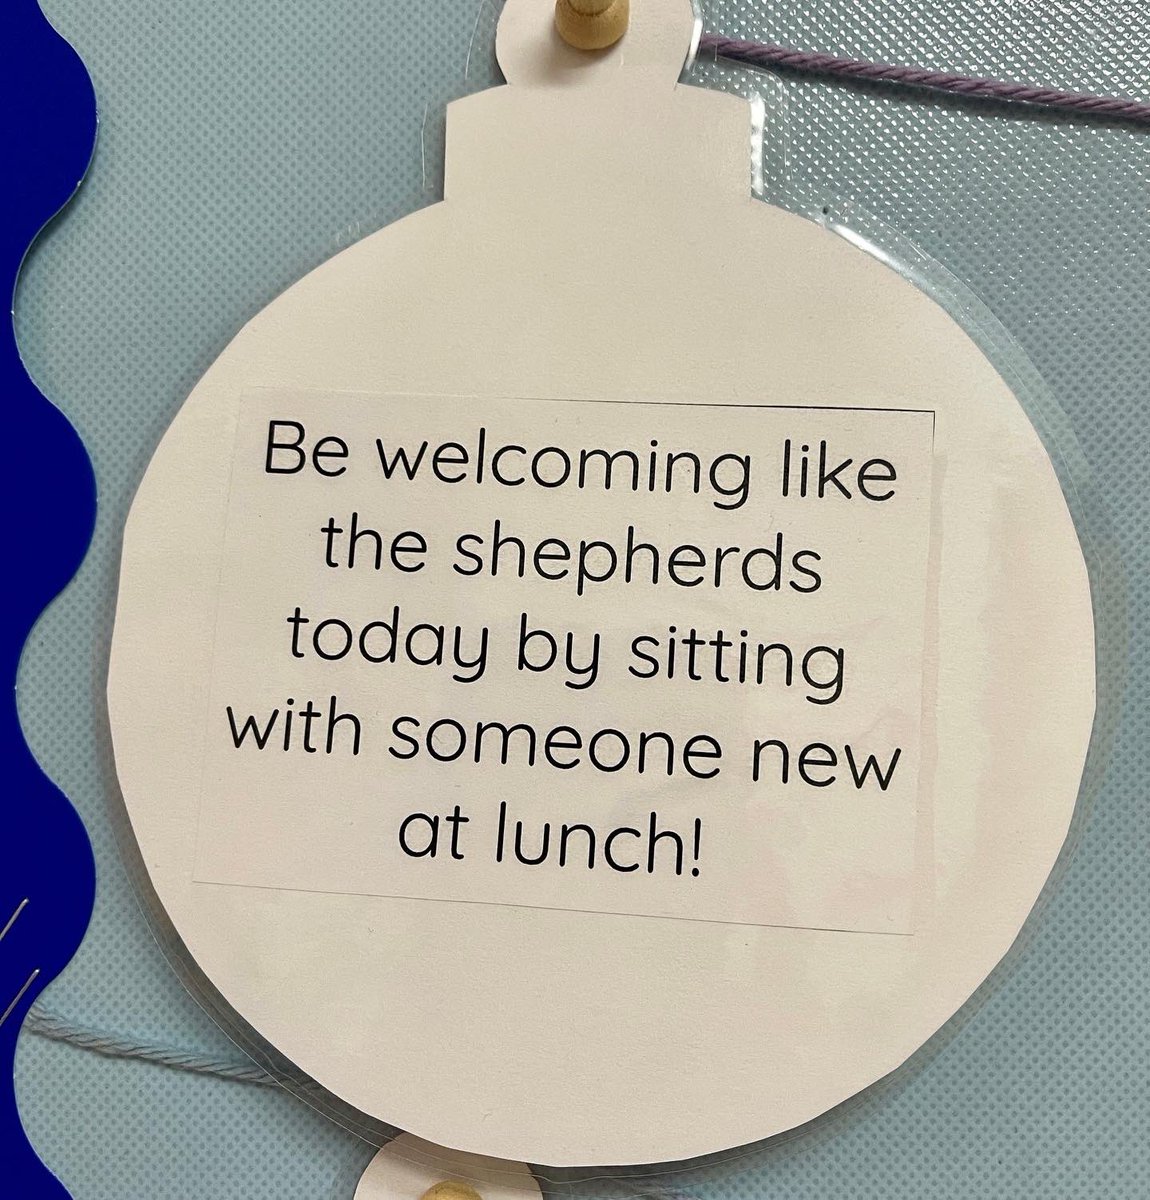 There are only a few days left on our Acts of Kindness Advent Calendar! From sitting with someone new at lunch to saying a special prayer for your family, our SJOA monarchs have truly spread kindness this Christmas season. 
🙏🏻🎄❤️

#sjoamonarchs #sjoaschool
#advent #kindness